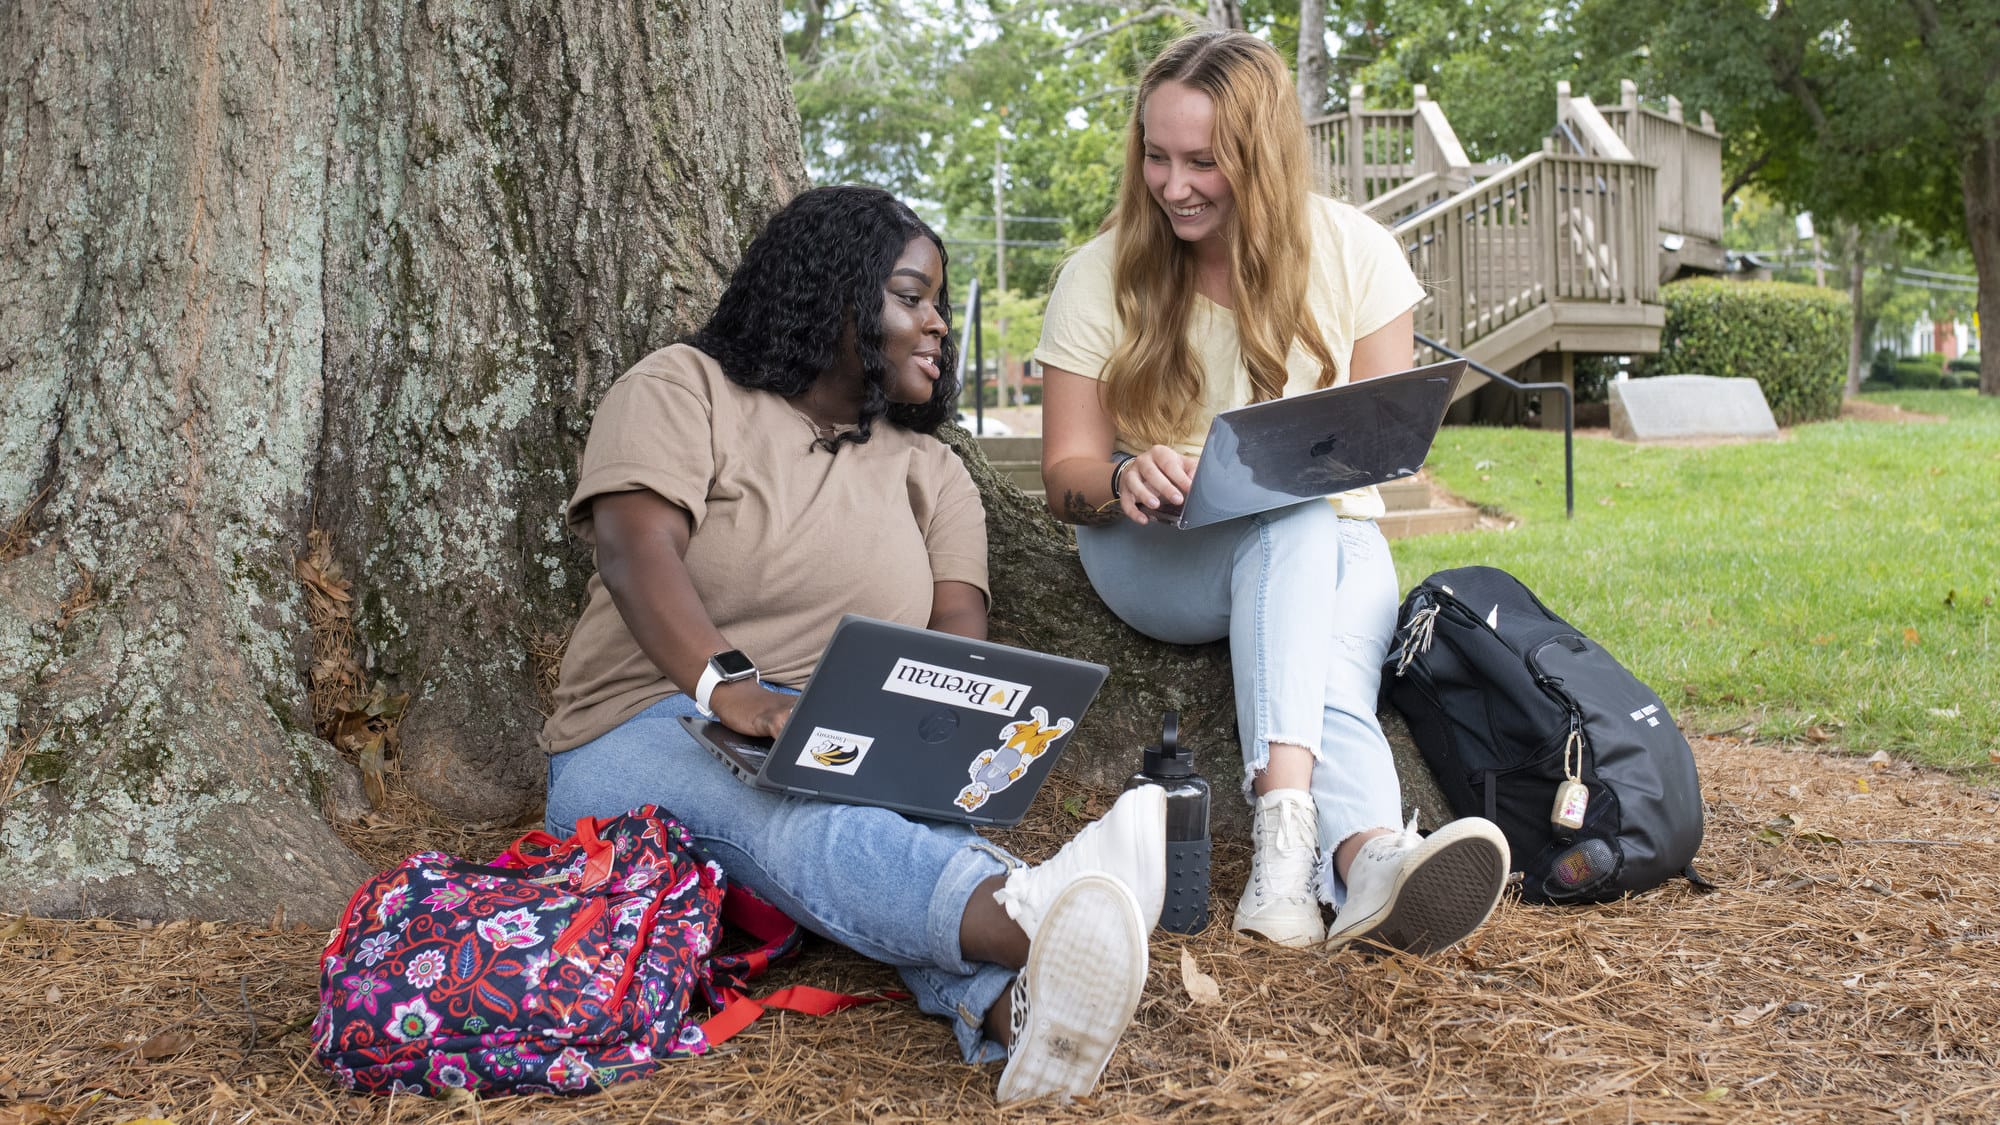 Two students study together in the shade of a tree